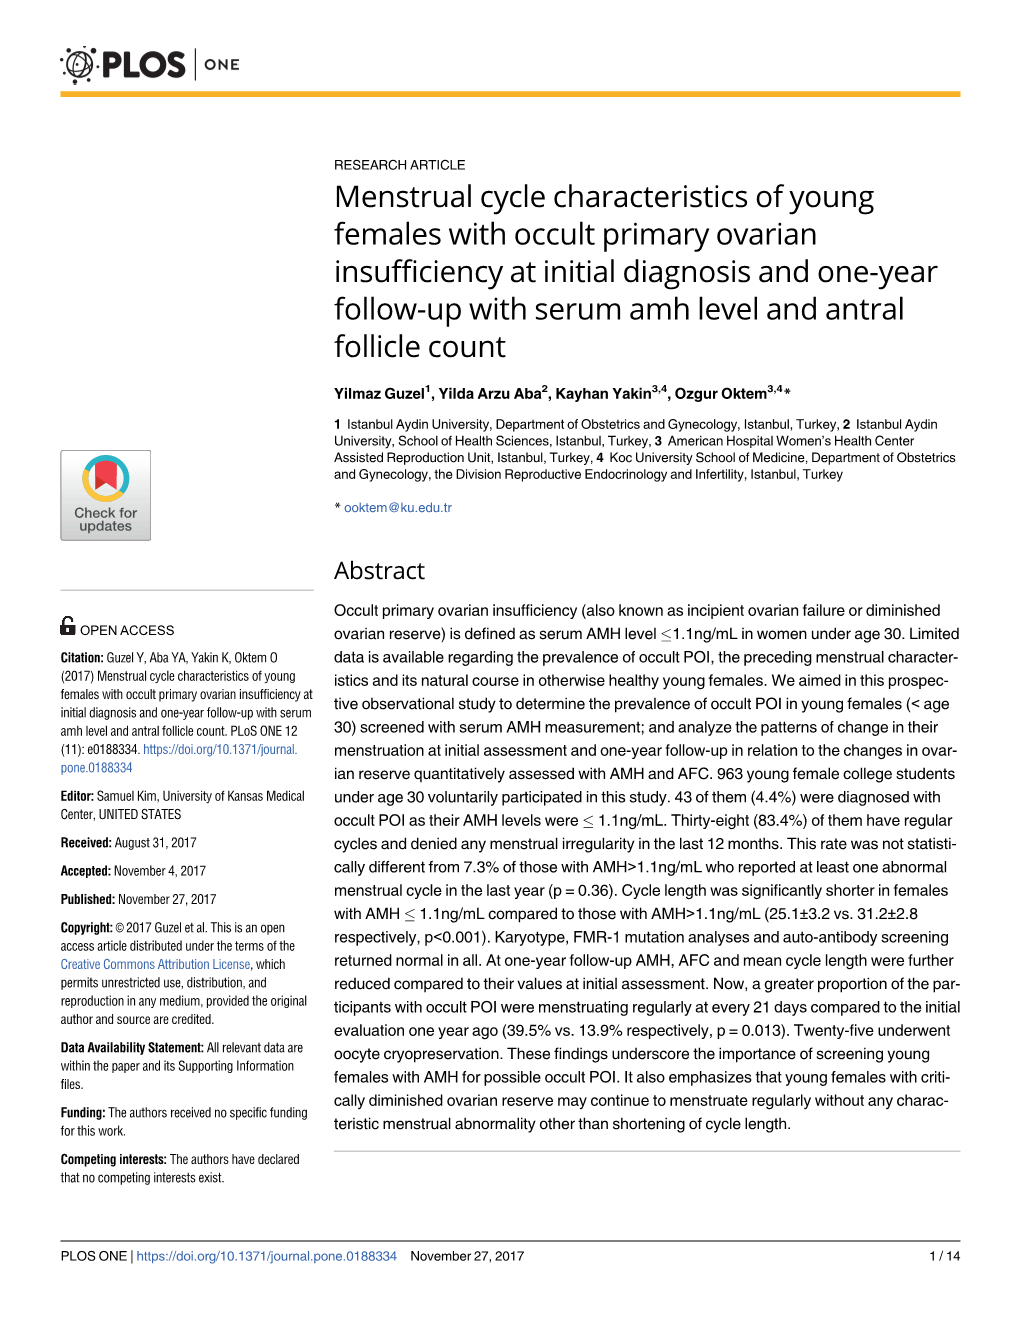 Menstrual Cycle Characteristics of Young Females with Occult Primary